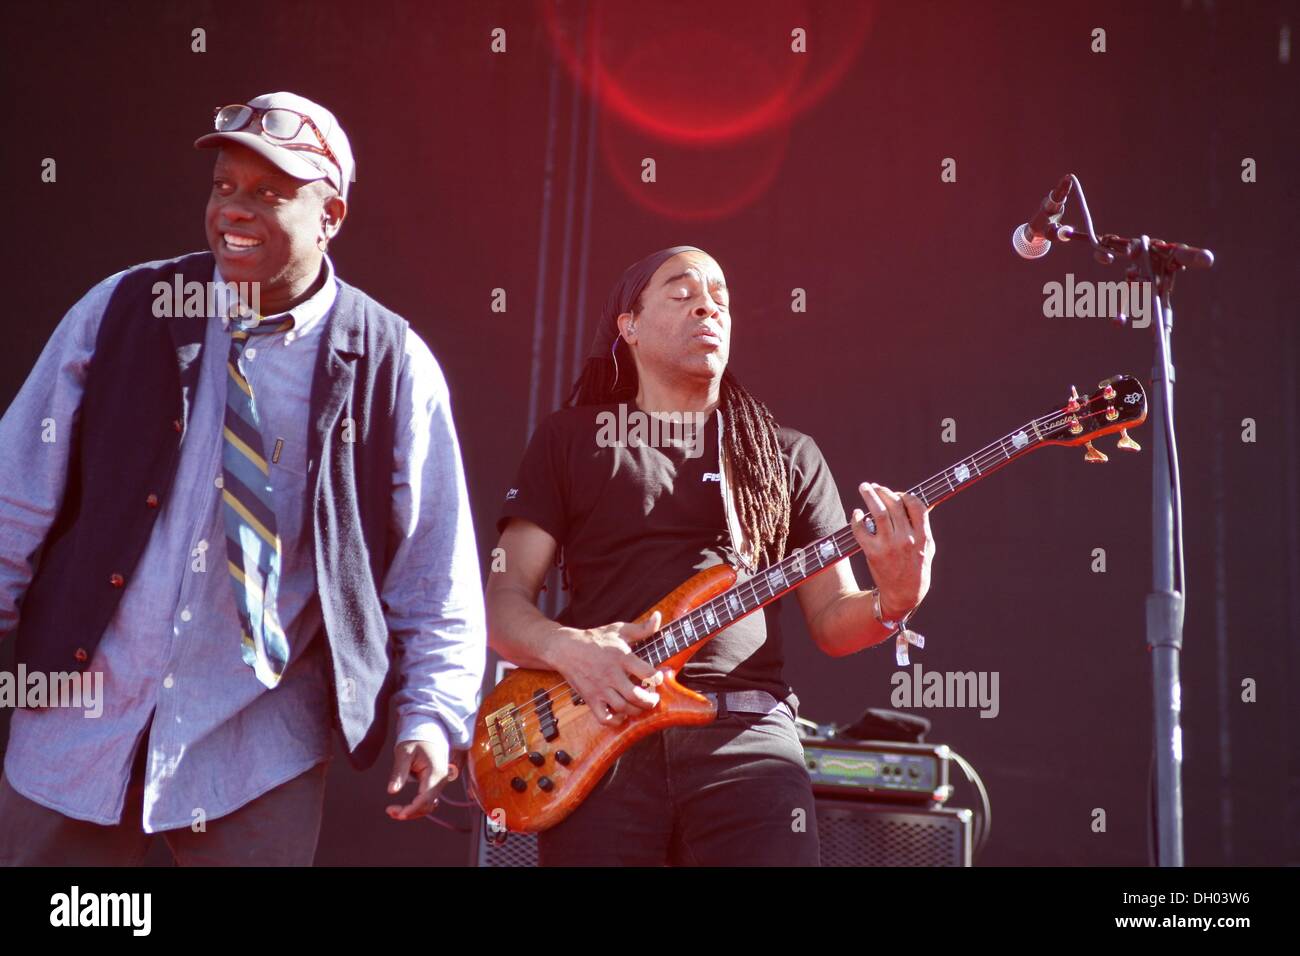 Las Vegas, NV, USA. 27th Oct, 2013. Living Colour, Corey Glover, Doug Wimbish, on stage at the Downtown stage in attendance for 2013 Life is Beautiful Festival - SUN, Las Vegas, NV October 27, 2013. © James Atoa/Everett Collection/Alamy Live News Stock Photo